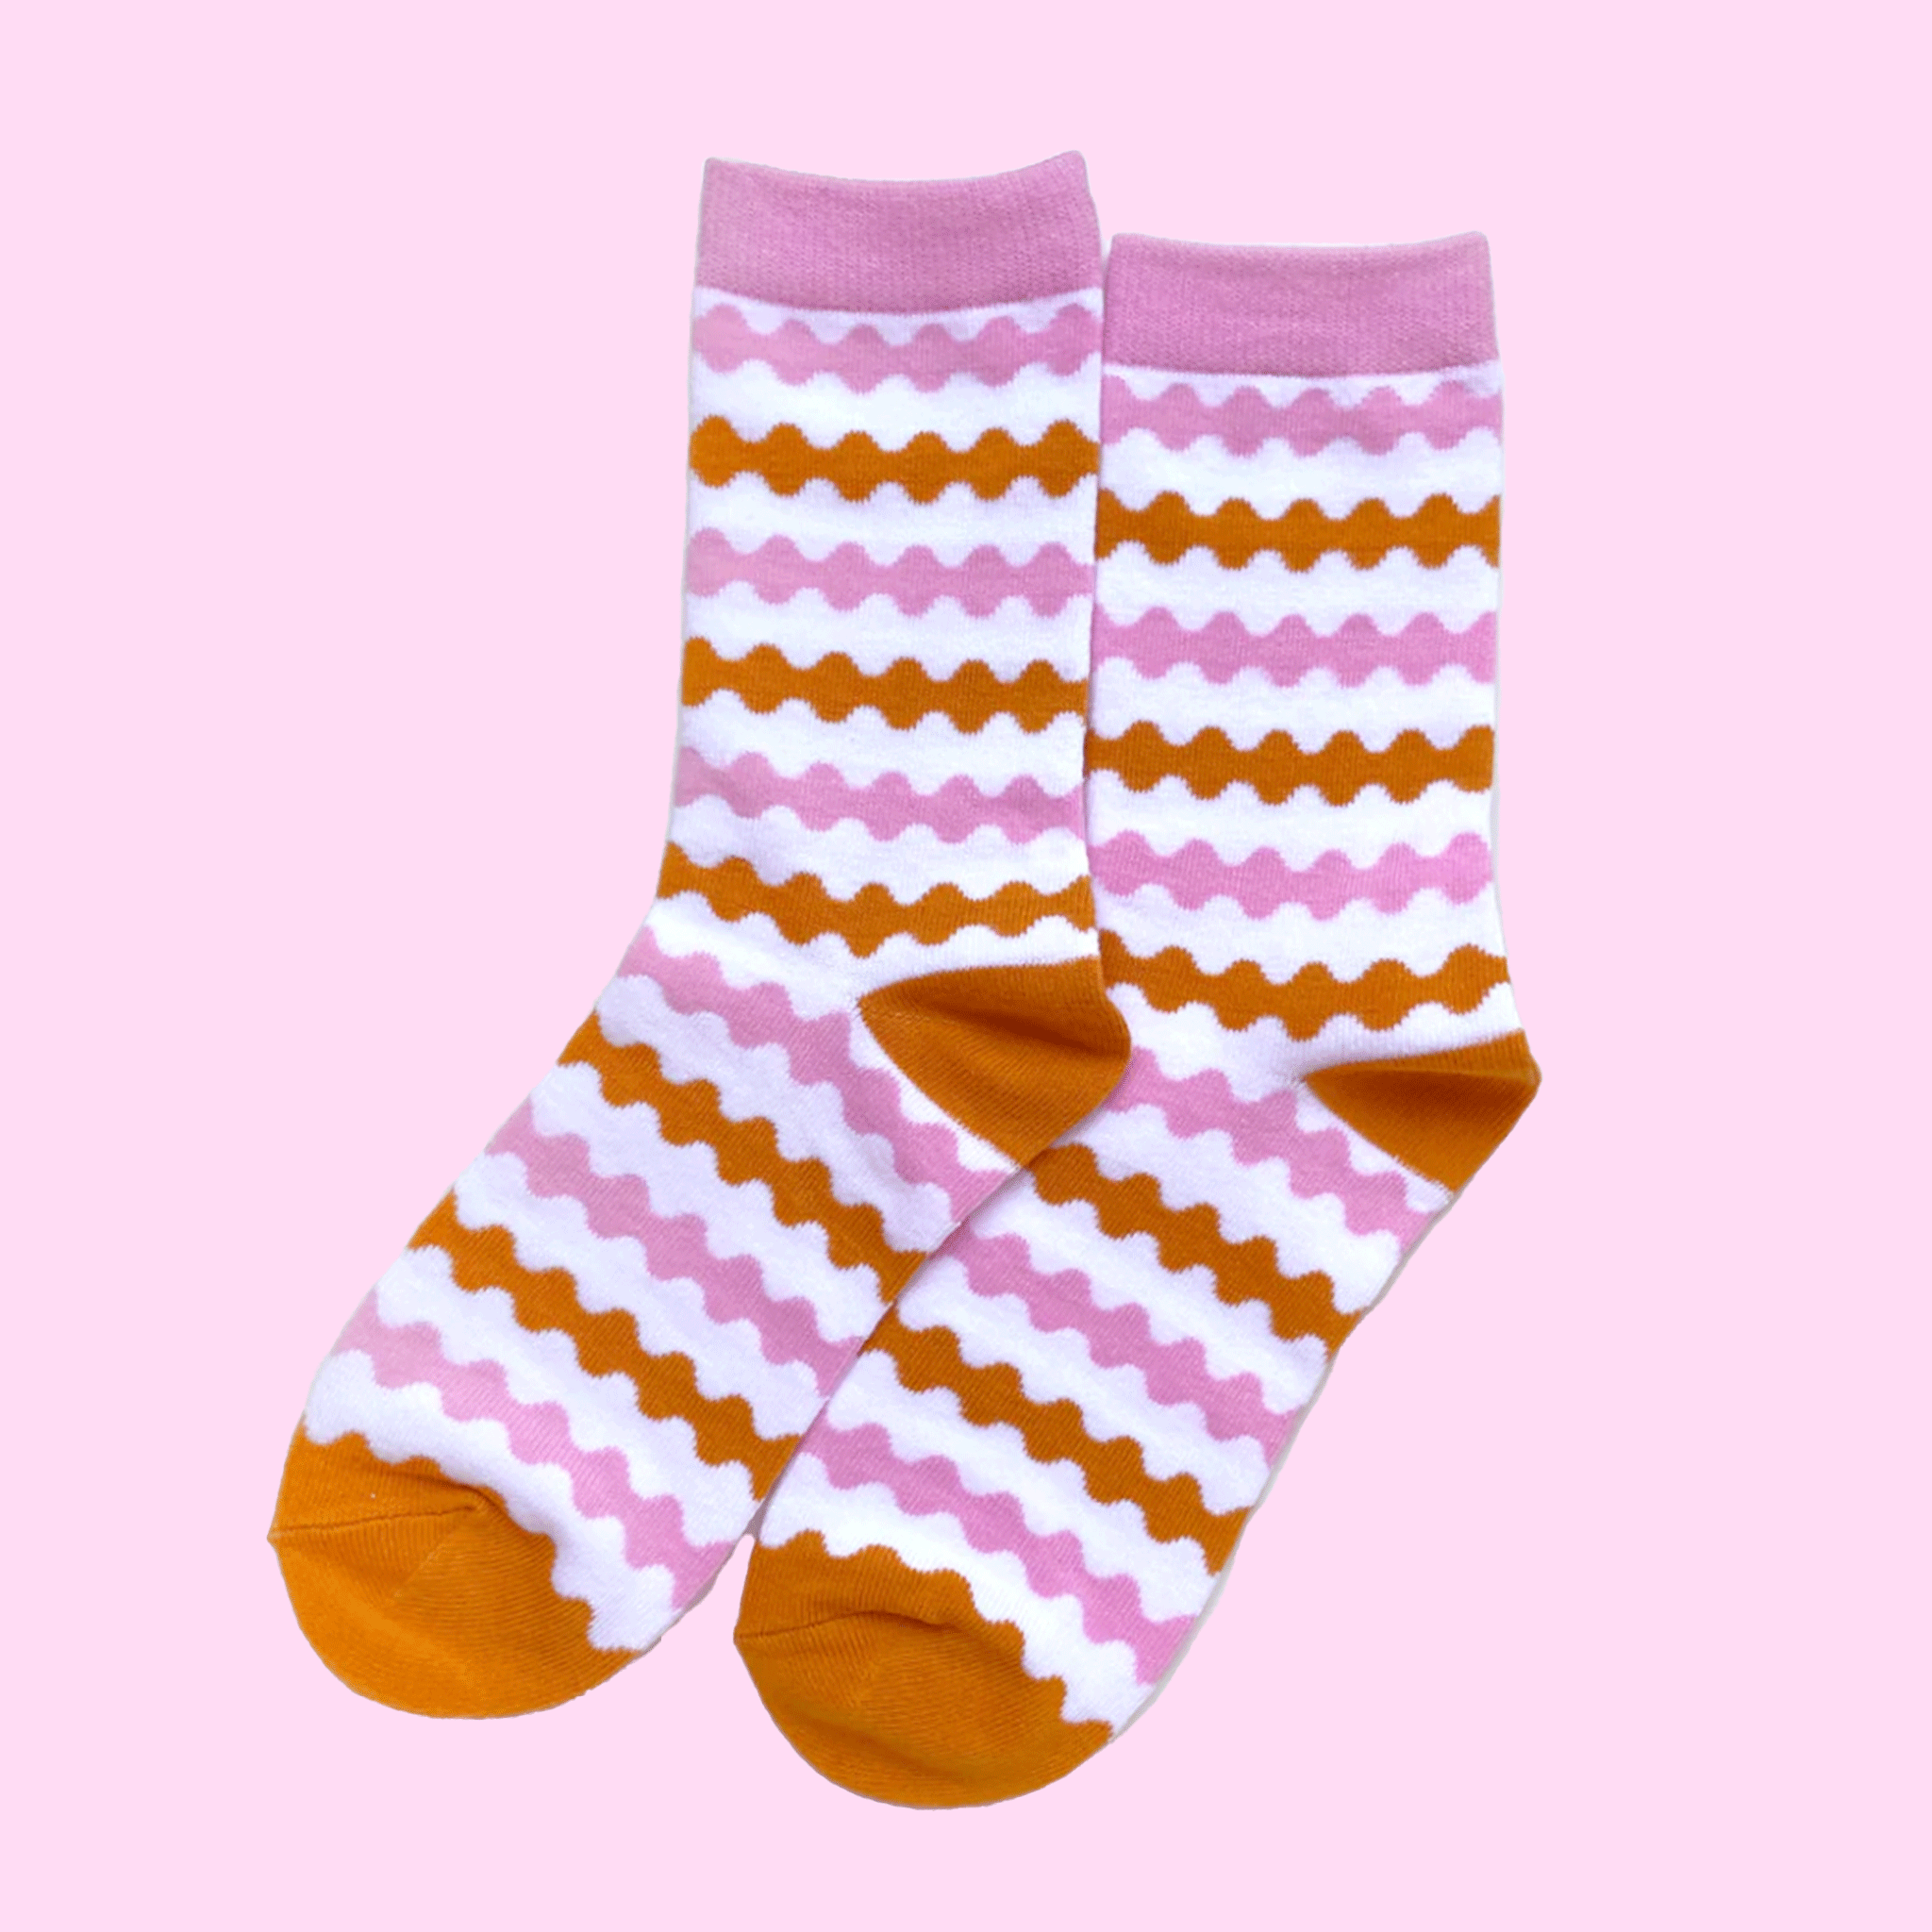 On a pink background is pink and orange striped socks.